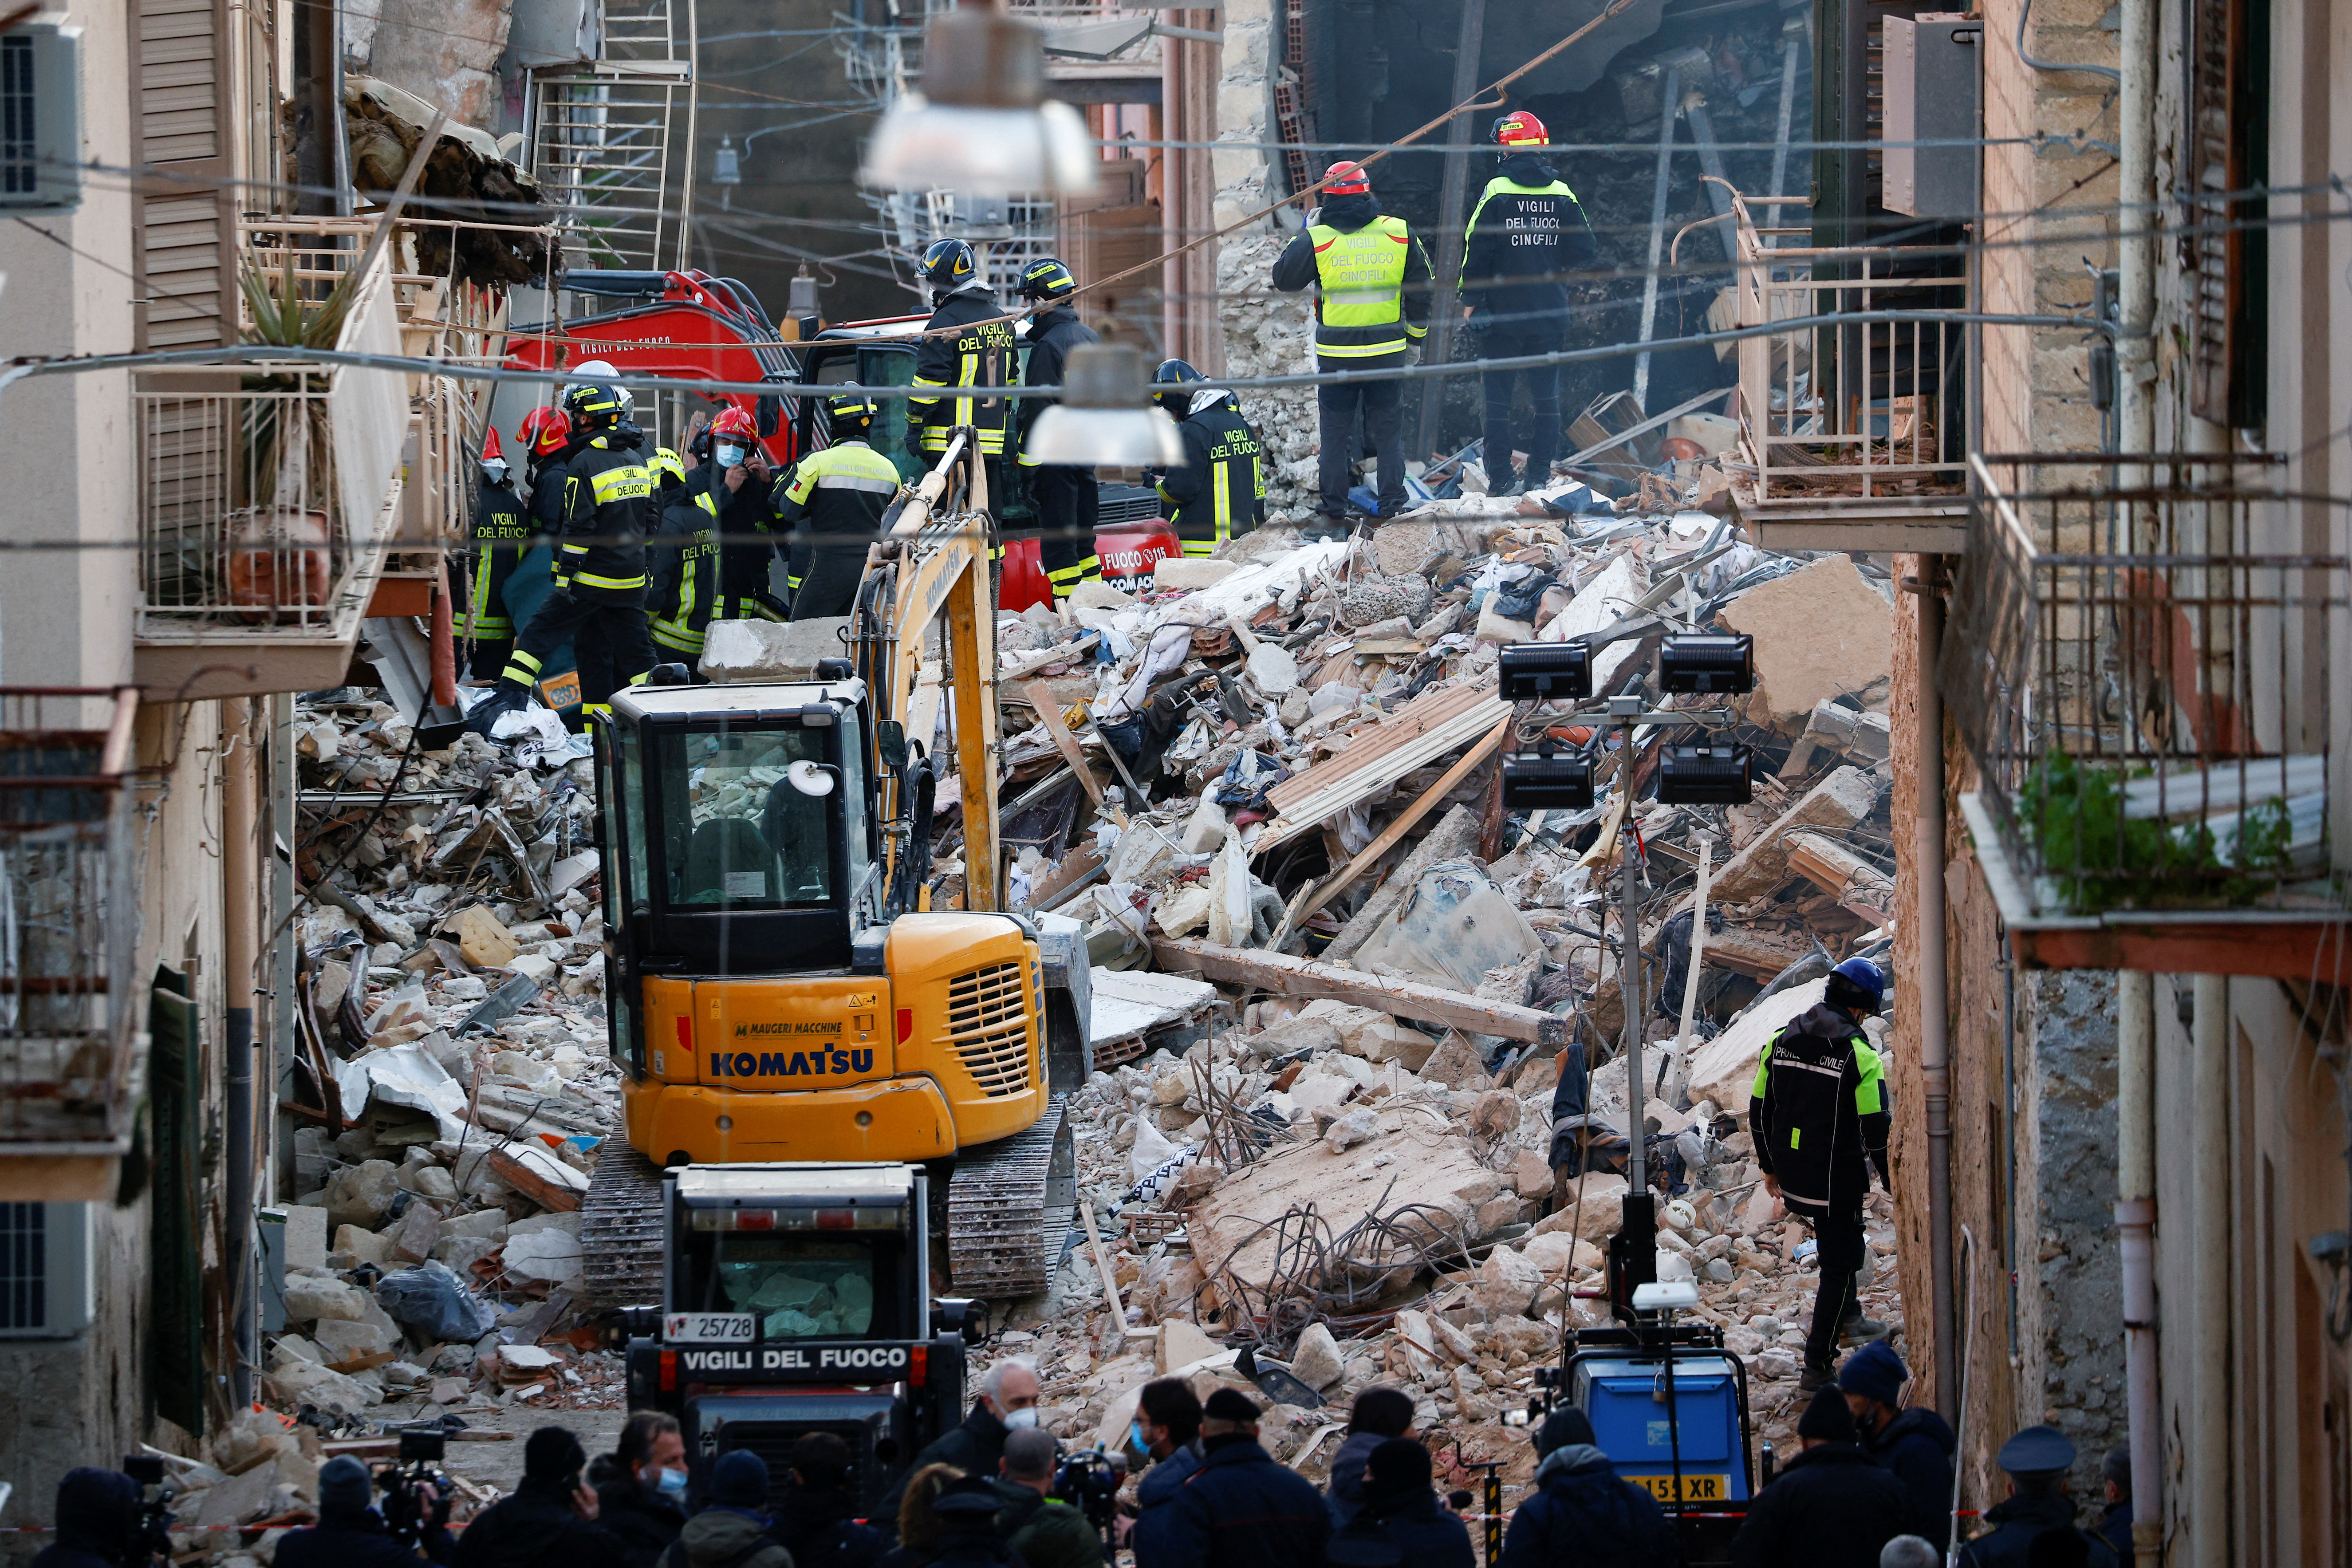 Search for survivors in the aftermath of an explosion in a residential building, in Ravanusa